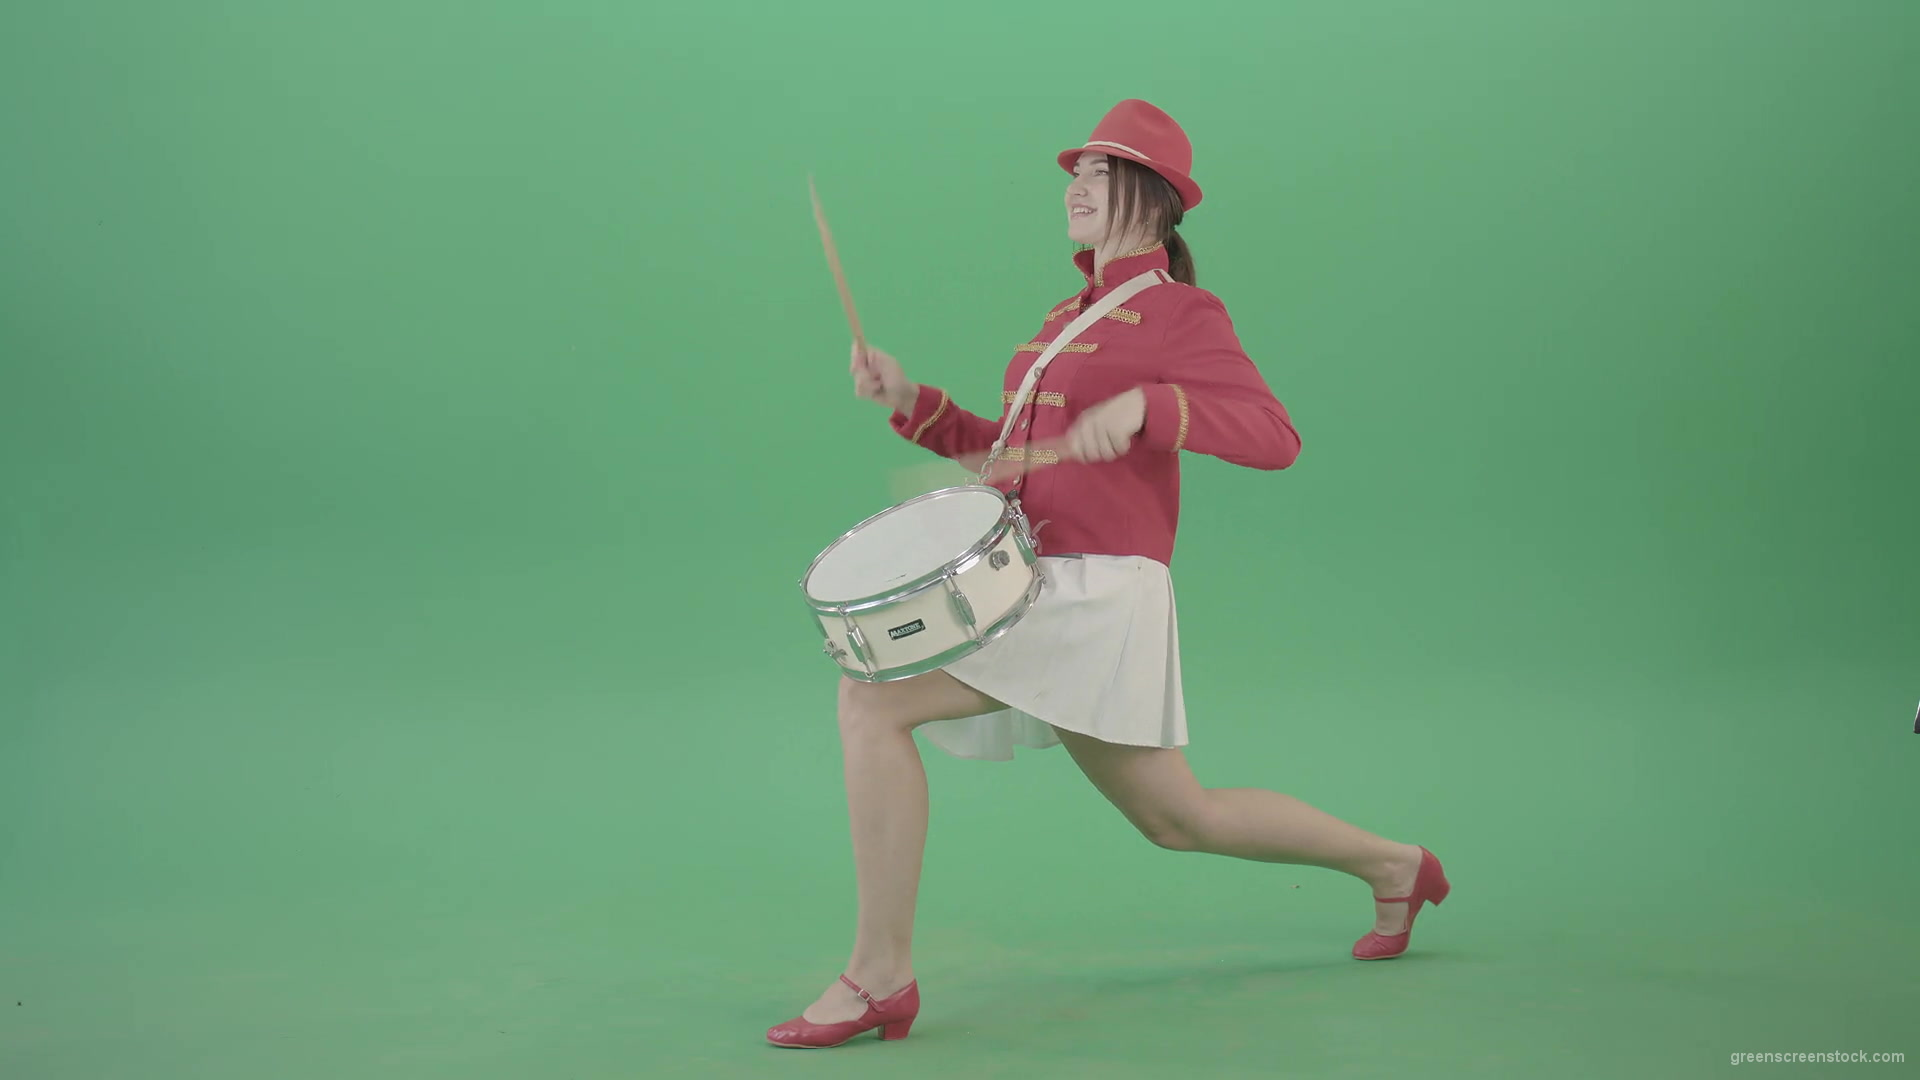 Stupid-funny-advertising-video-footage-with-drumming-girl-isolated-on-green-screen-4K-Video-Footage-1920_004 Green Screen Stock